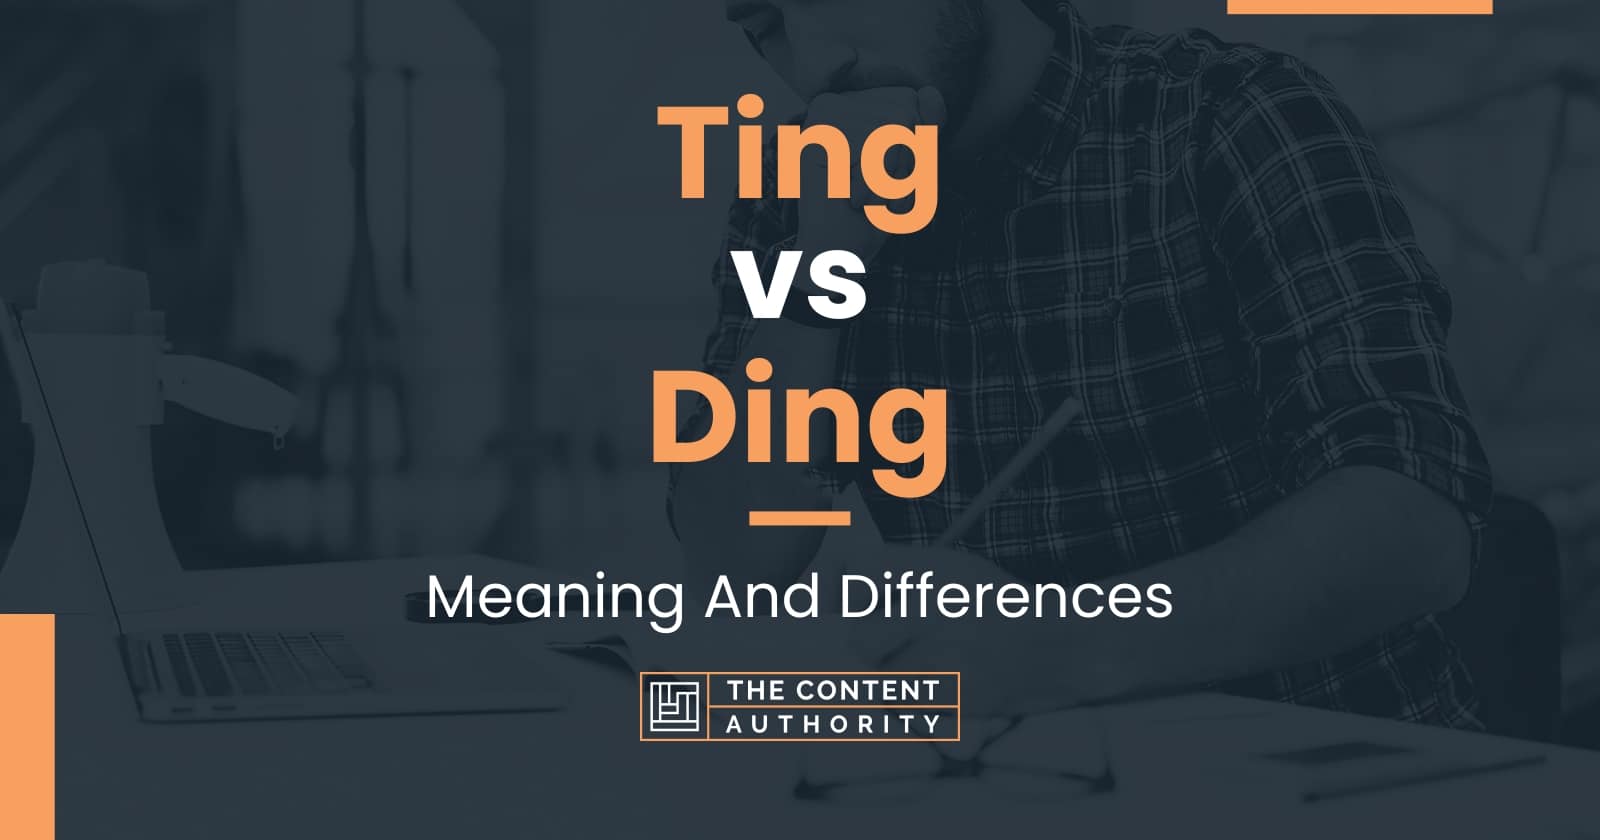 Ting vs Ding: Meaning And Differences